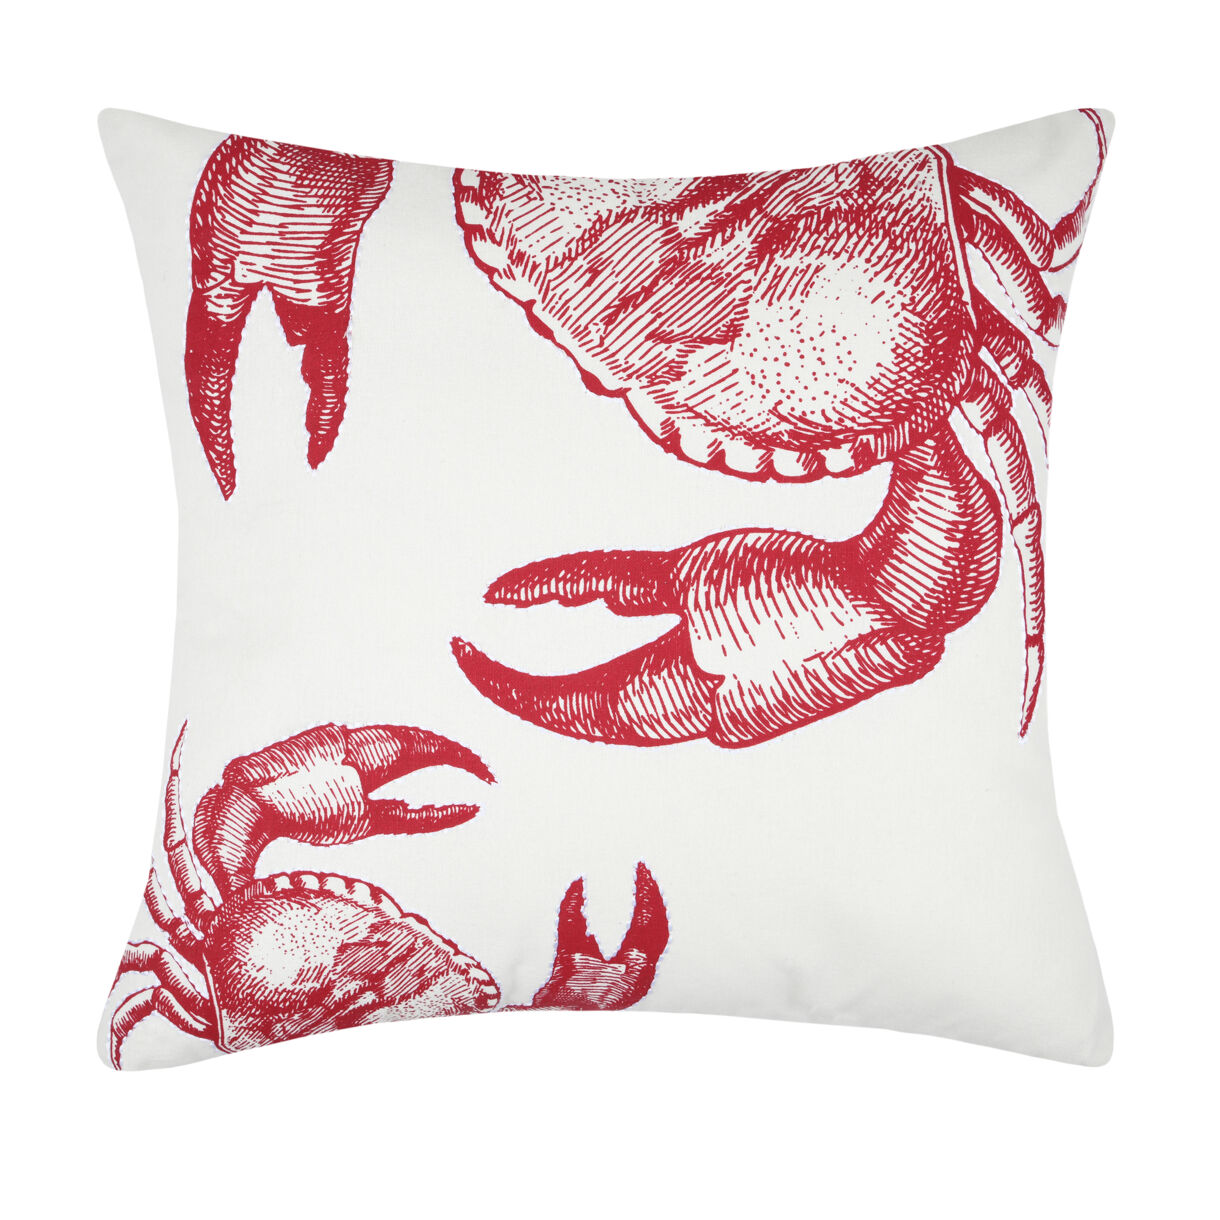 SHELLFISH COUSSIN 45X45 ROUGE